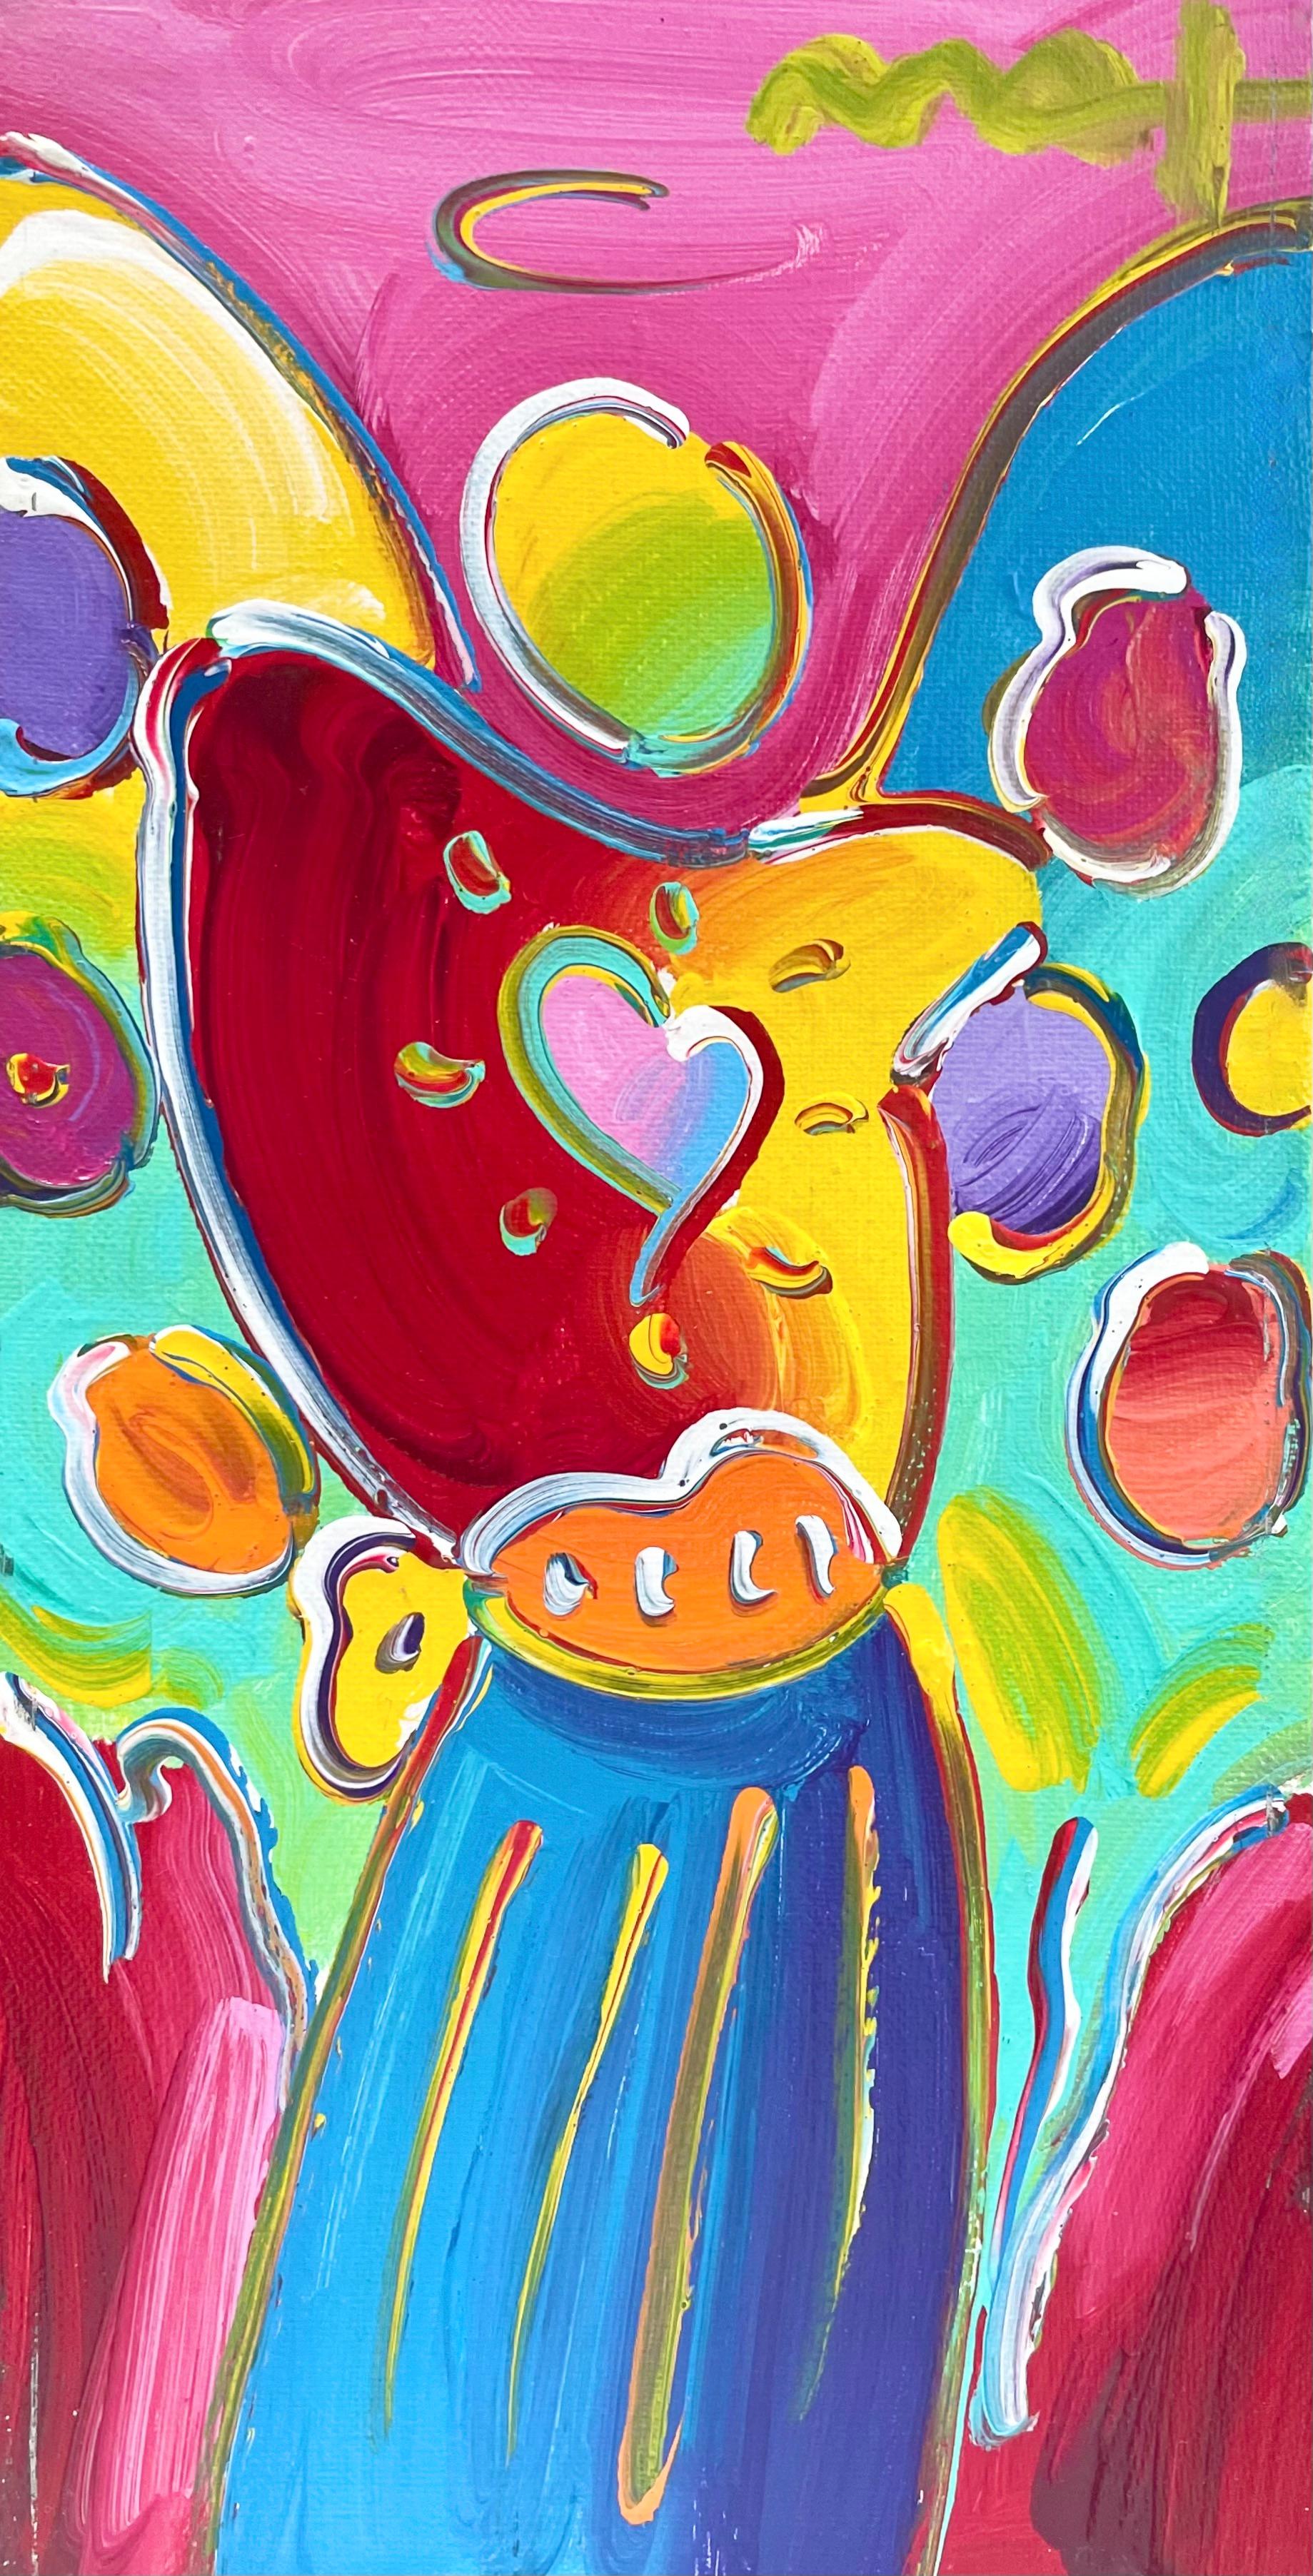 Peter Max Angel With Heart - 14 For Sale on 1stDibs  peter max angel with  heart price, angel with heart peter max, peter max angel with heart story